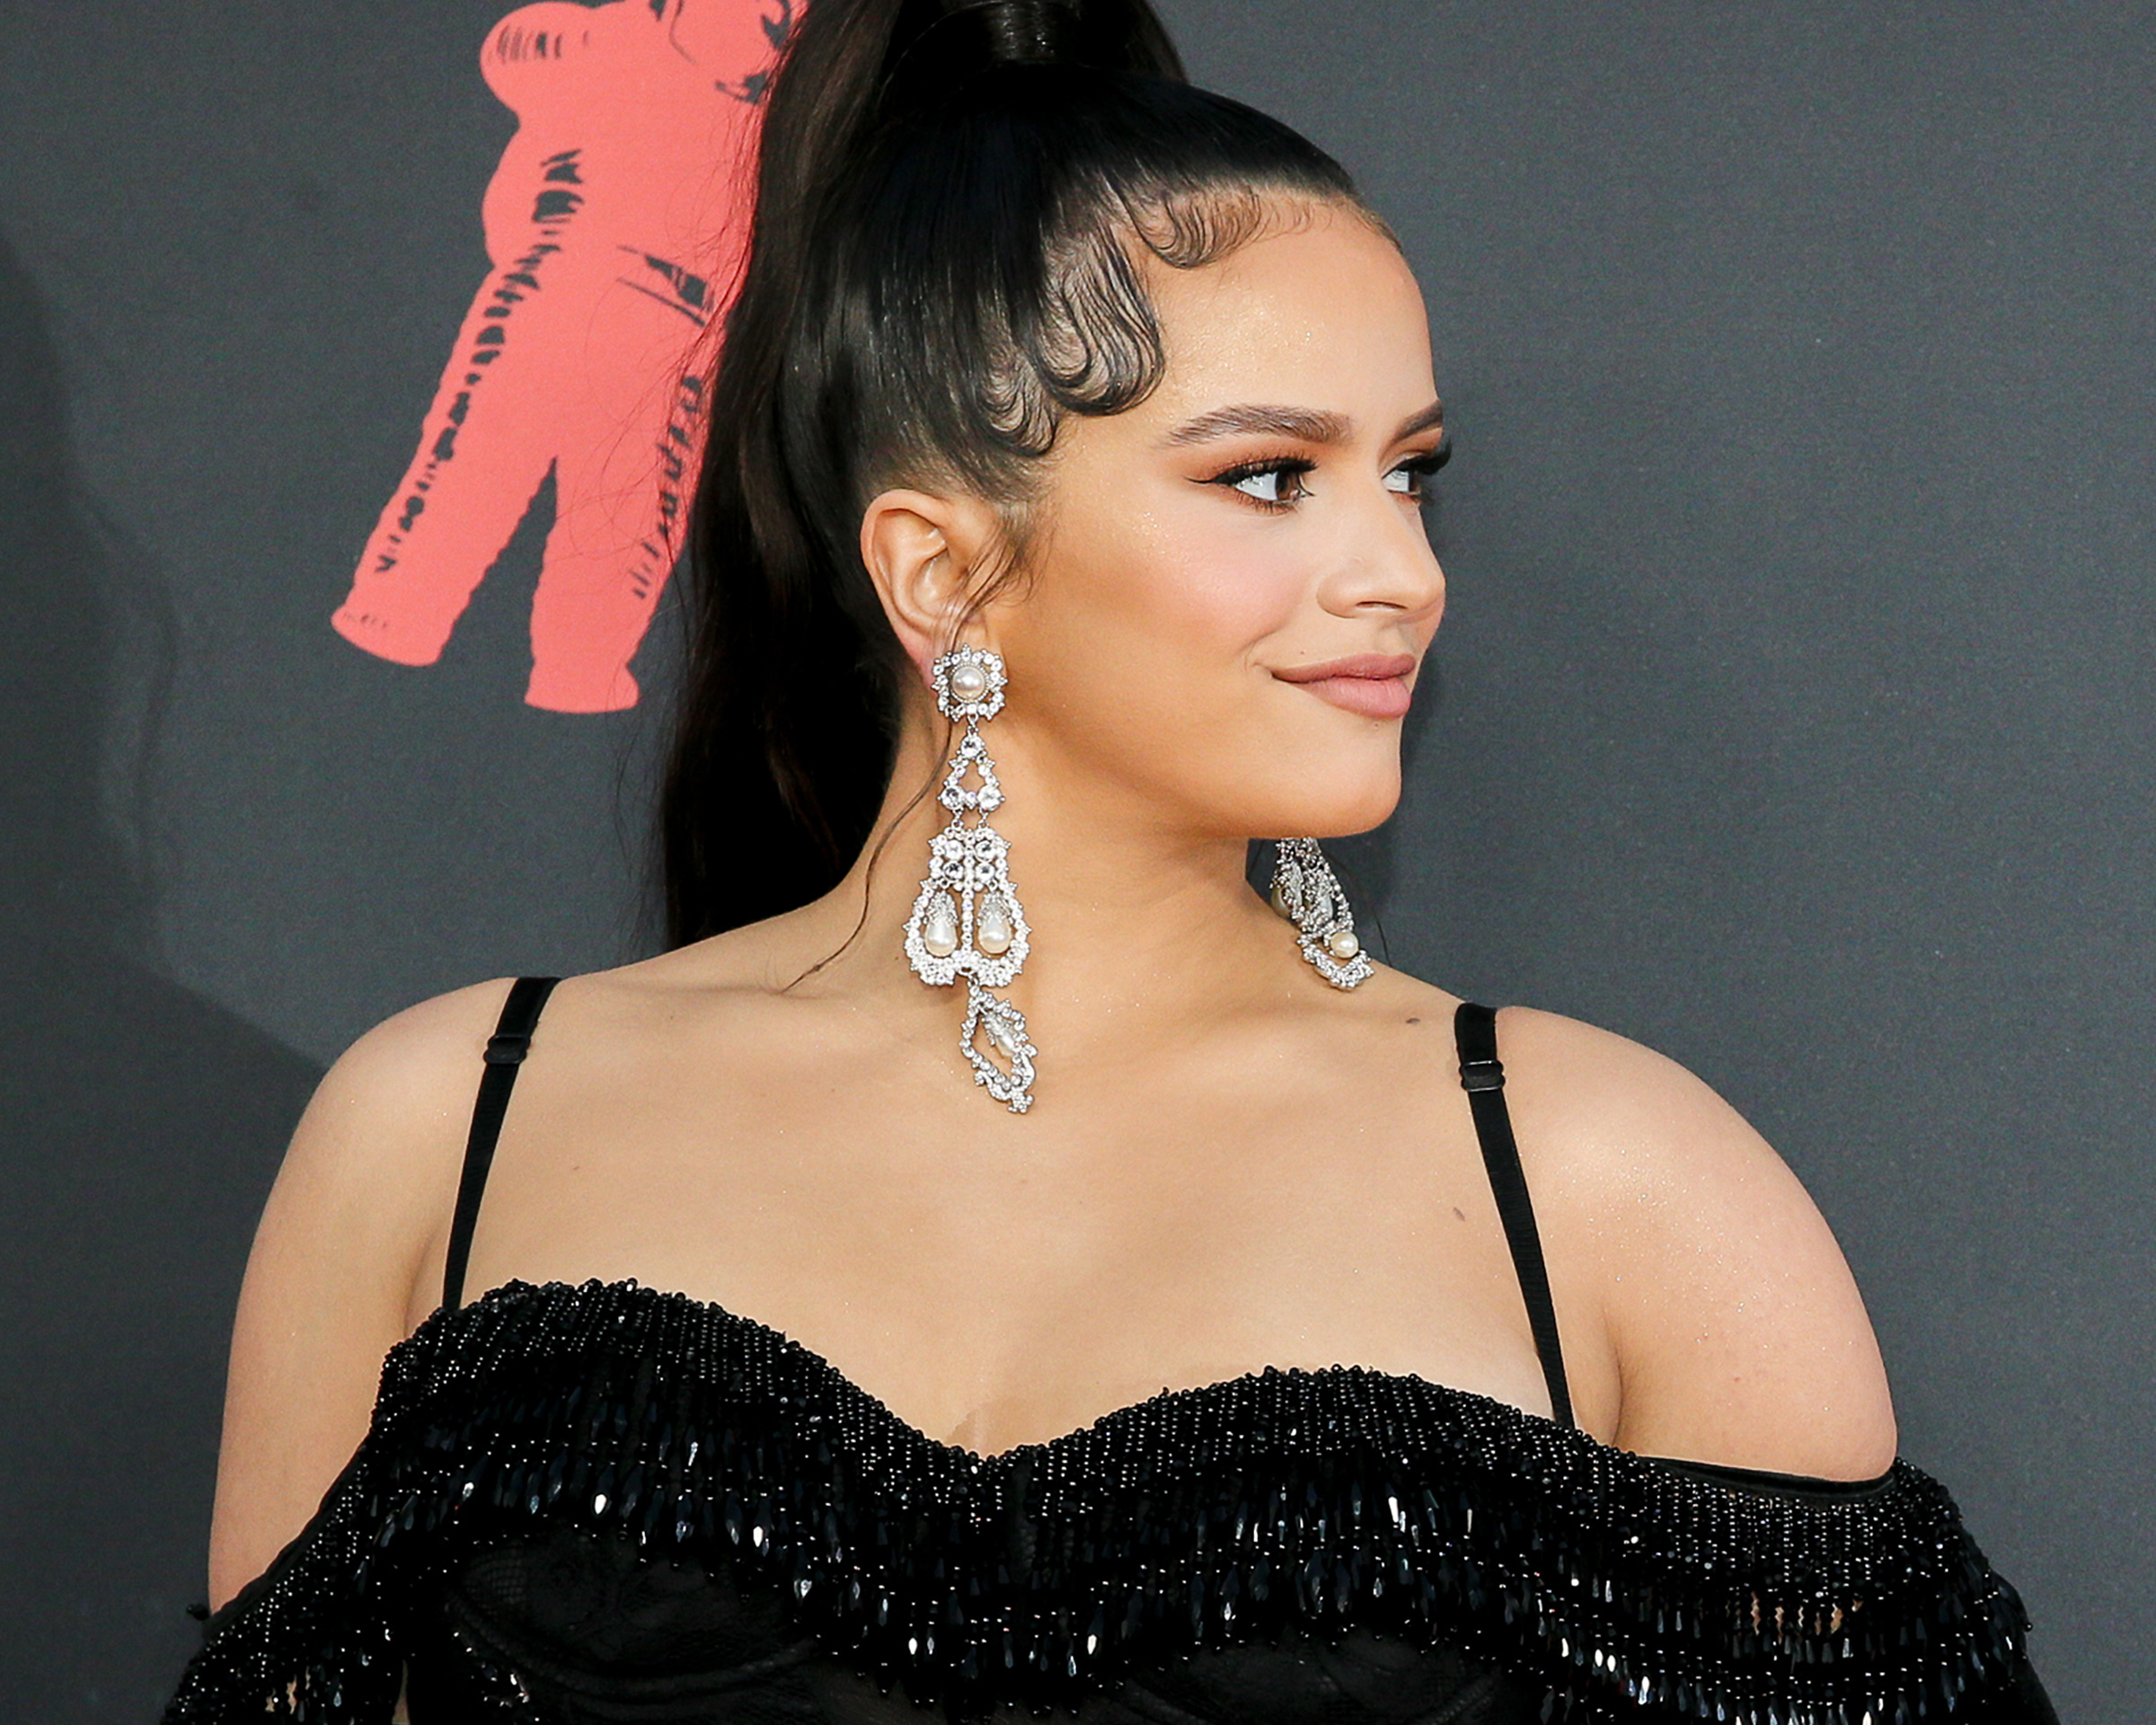 Rosalía wearing custom designed diamond chandelier earrings with pearls at the 2019 MTV Video Music Awards 